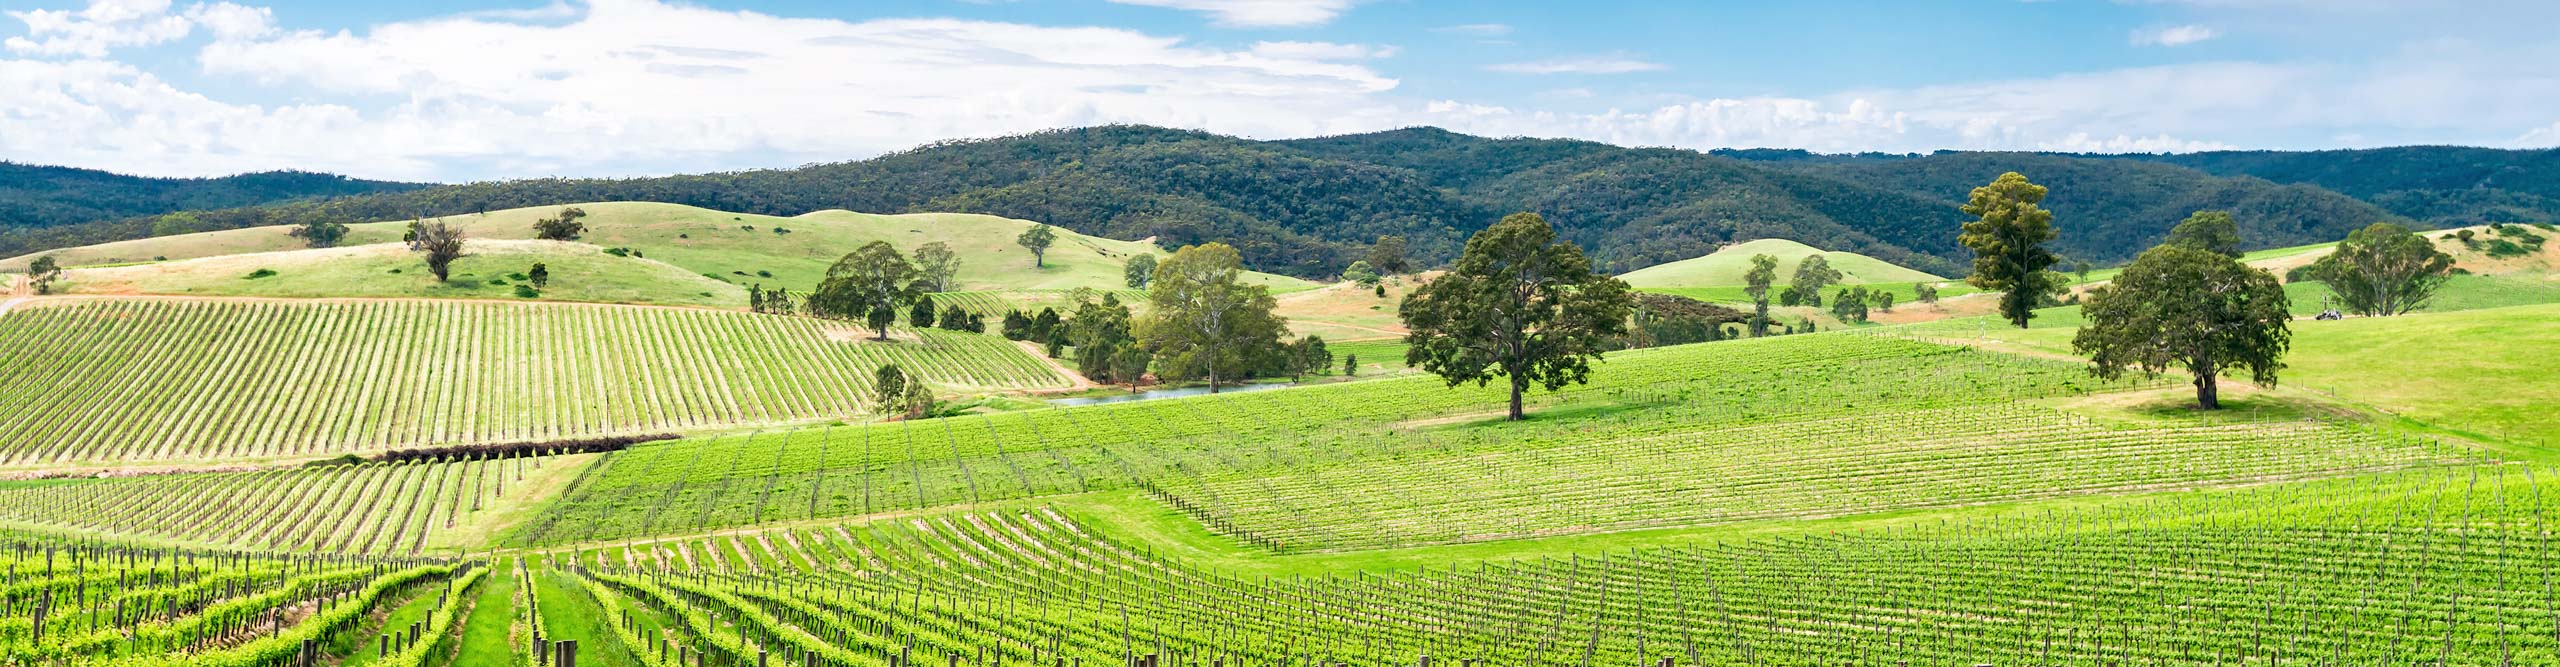 The vineyards of the Barossa Valley